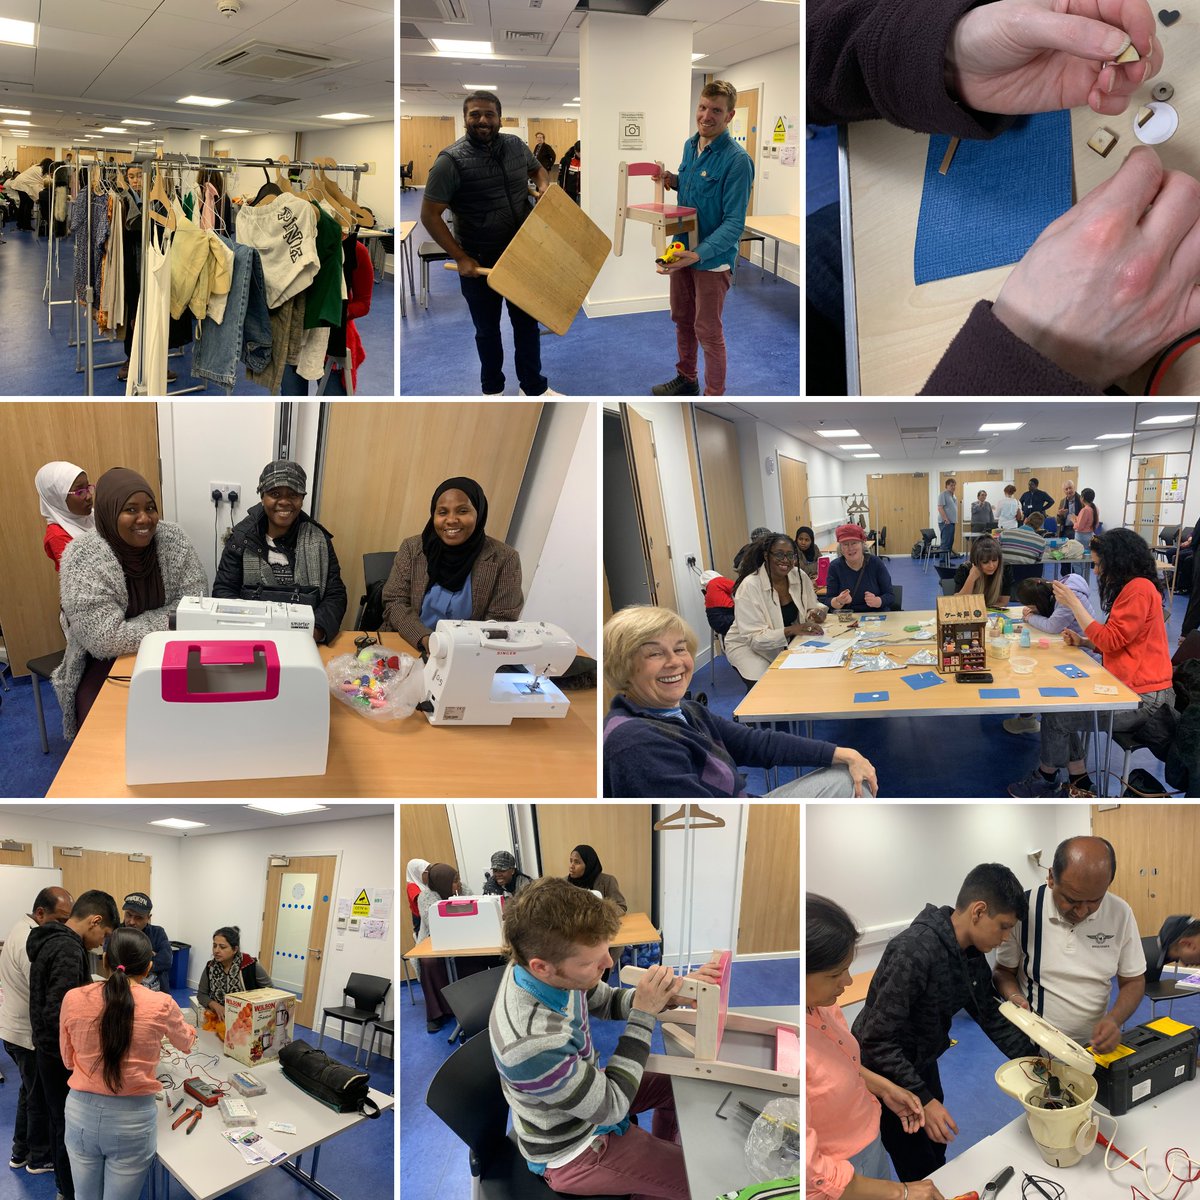 On Wednesday we've facilitated a Repair Café, a fashion swap and a creative workshop upcycling wood into miniature cakes, all part of the #Finchley Sharing Space. Visitors told us how satisfying it is to repair and swap instead of throwing items away, we couldn't agree more!